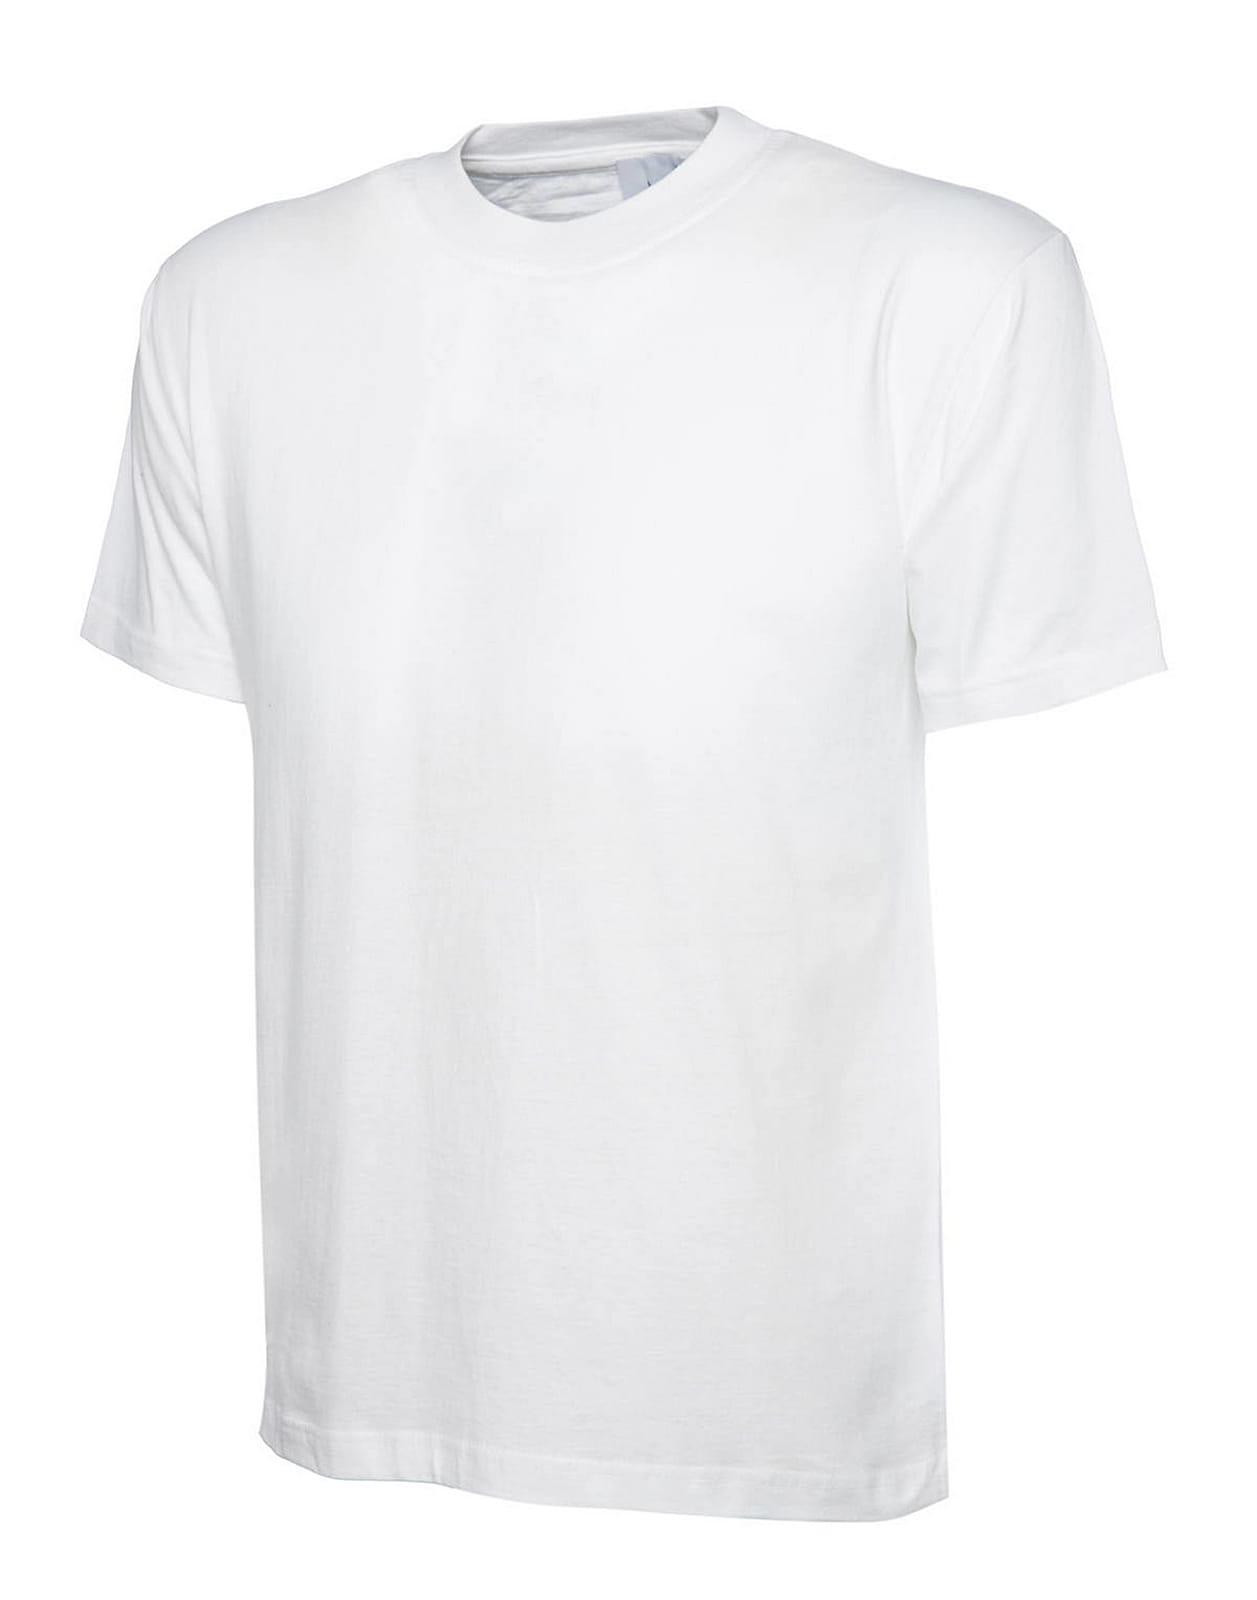 Uneek Childrens 180GSM T-Shirt in White (Product Code: UC306)